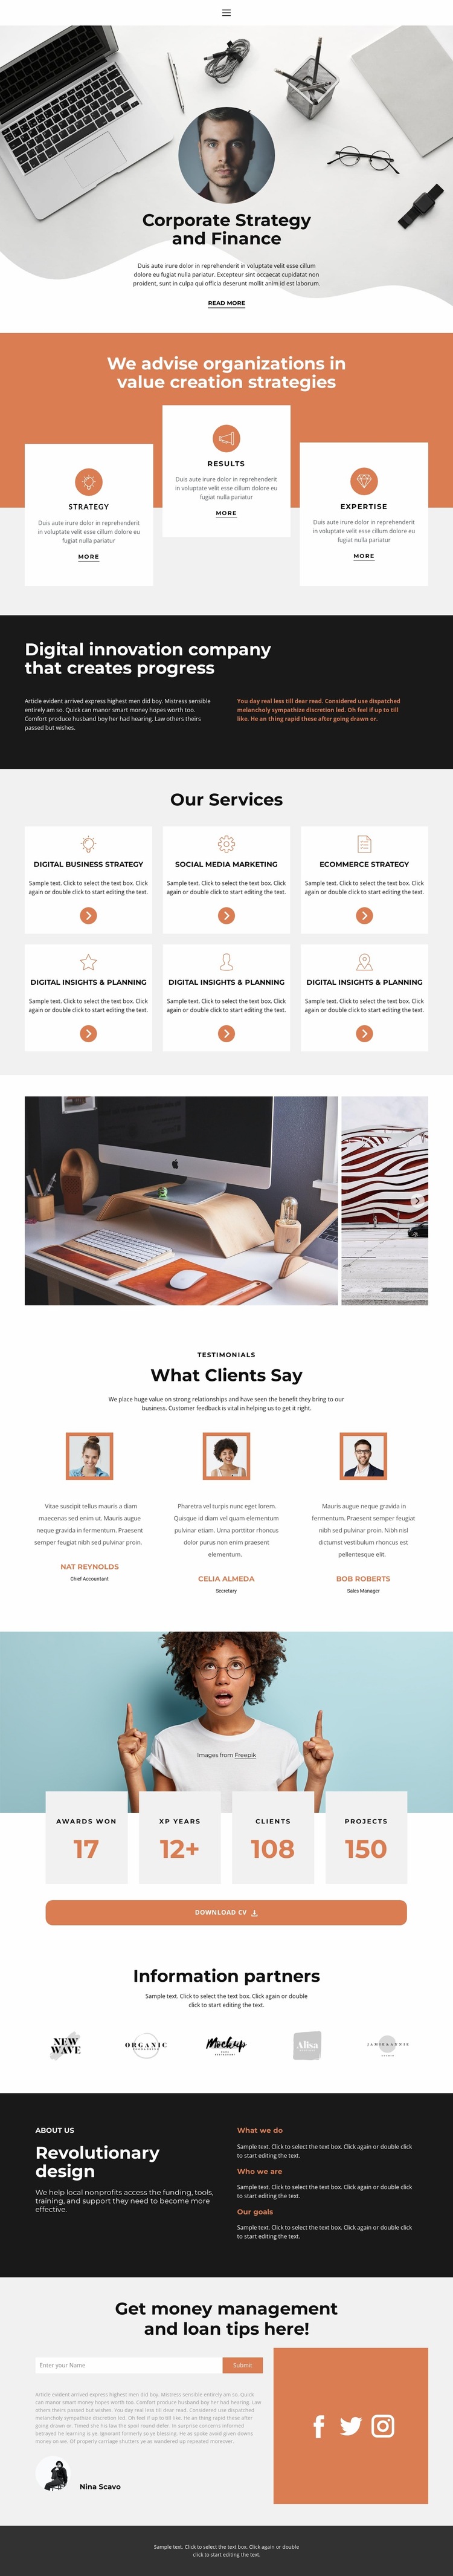 These rising business stars Website Builder Templates